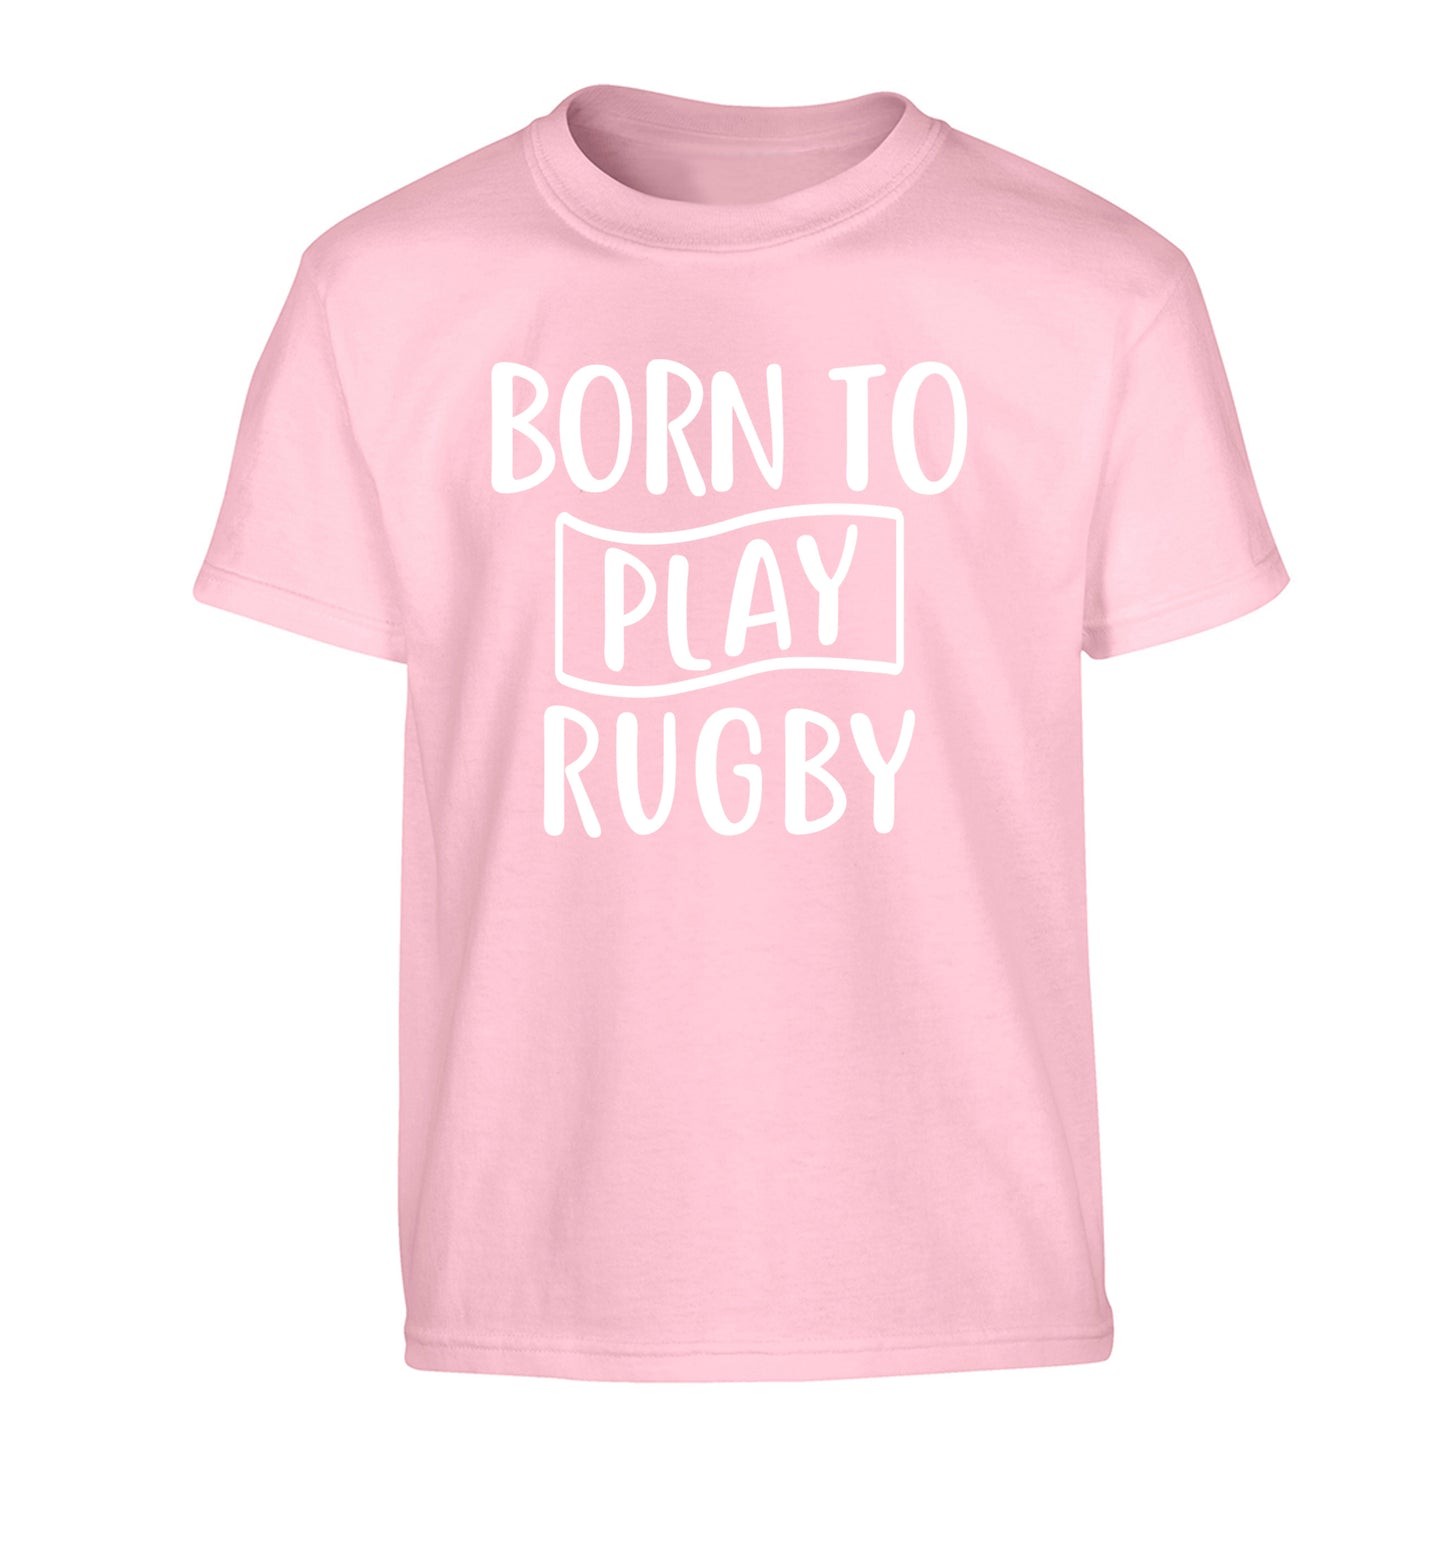 Born to play rugby Children's light pink Tshirt 12-13 Years